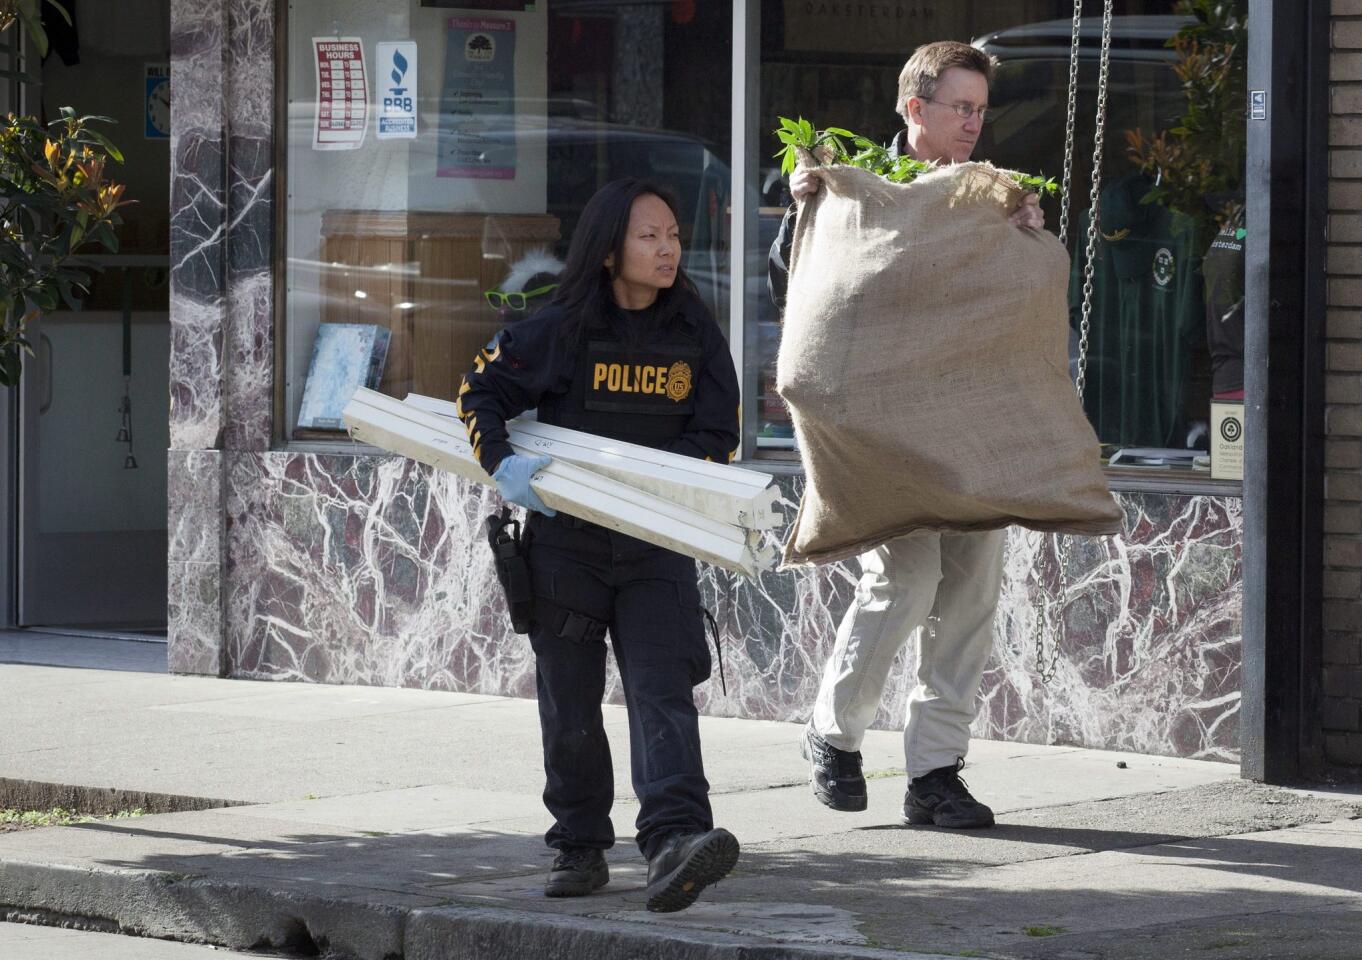 Agents from the DEA and the IRS-CID load an alleged bag of cannabis and light fixtures from the Oaksterdam gift shop during an early morning multi-agency raid in Oakland. Oaksterdam University runs several facilities in downtown Oakland for education and distribution of medical cannabis.